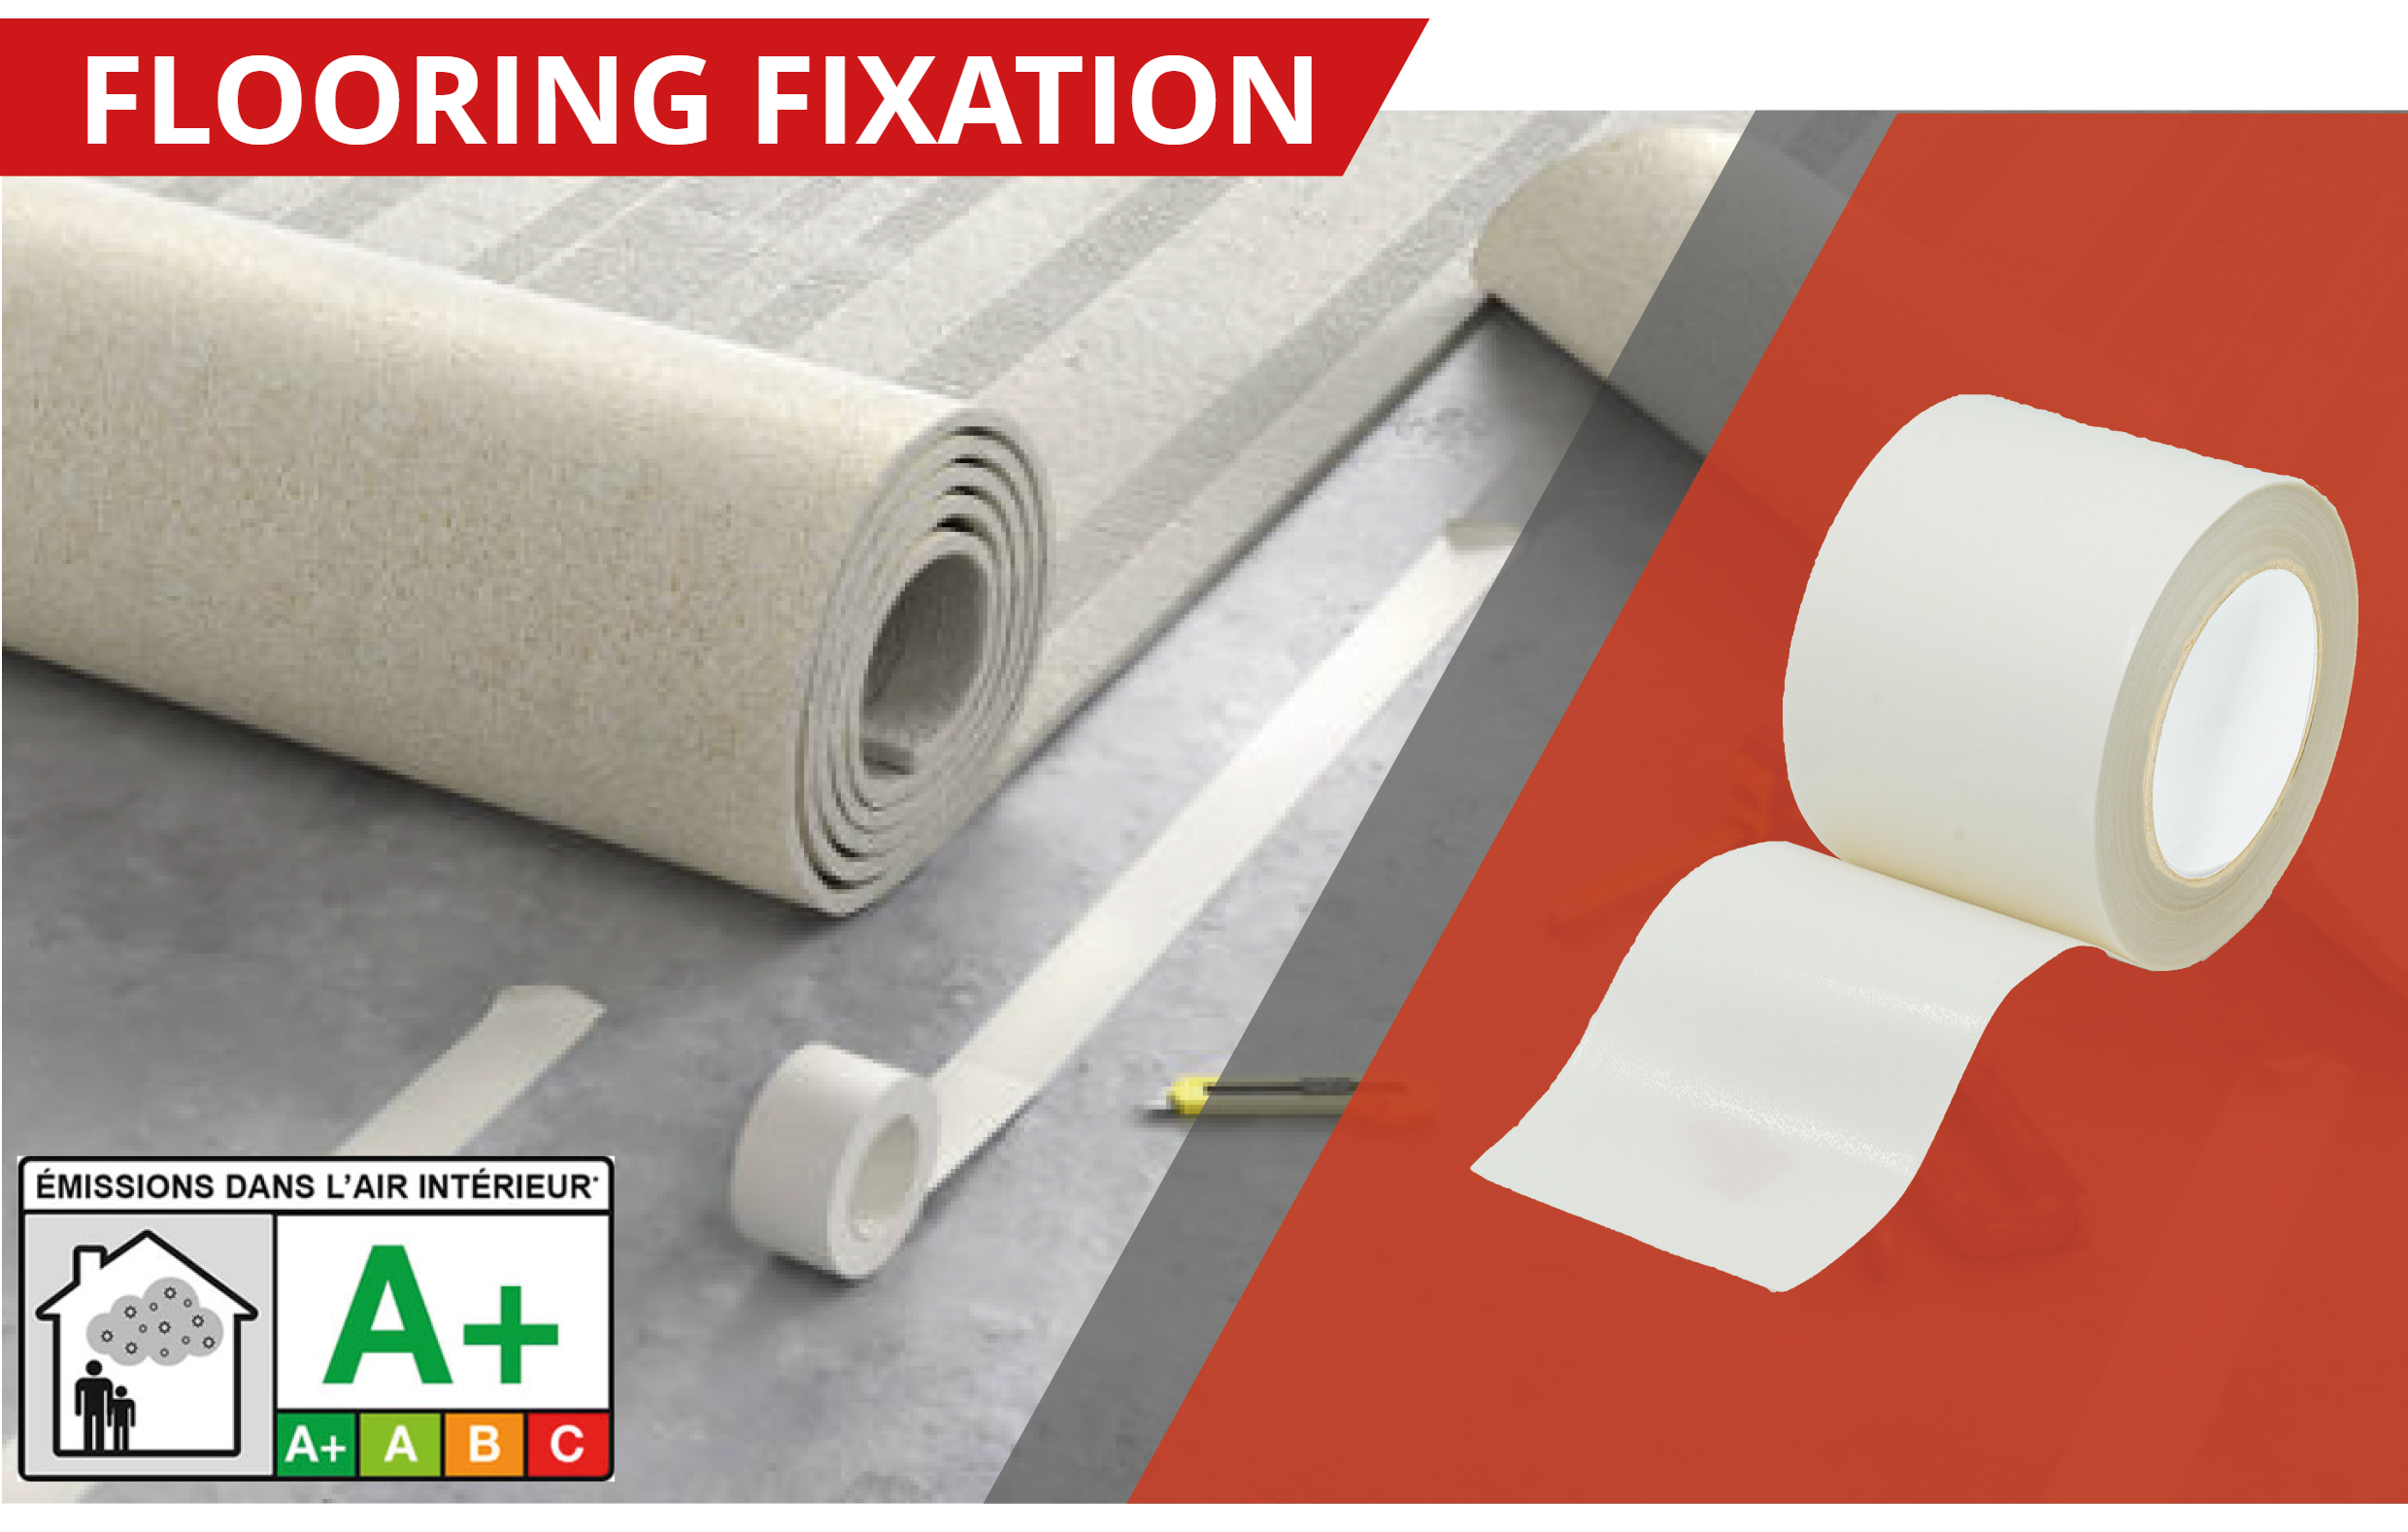 AN ADHESIVE TAPE FOR FIXING ASBESTOS FLOORS